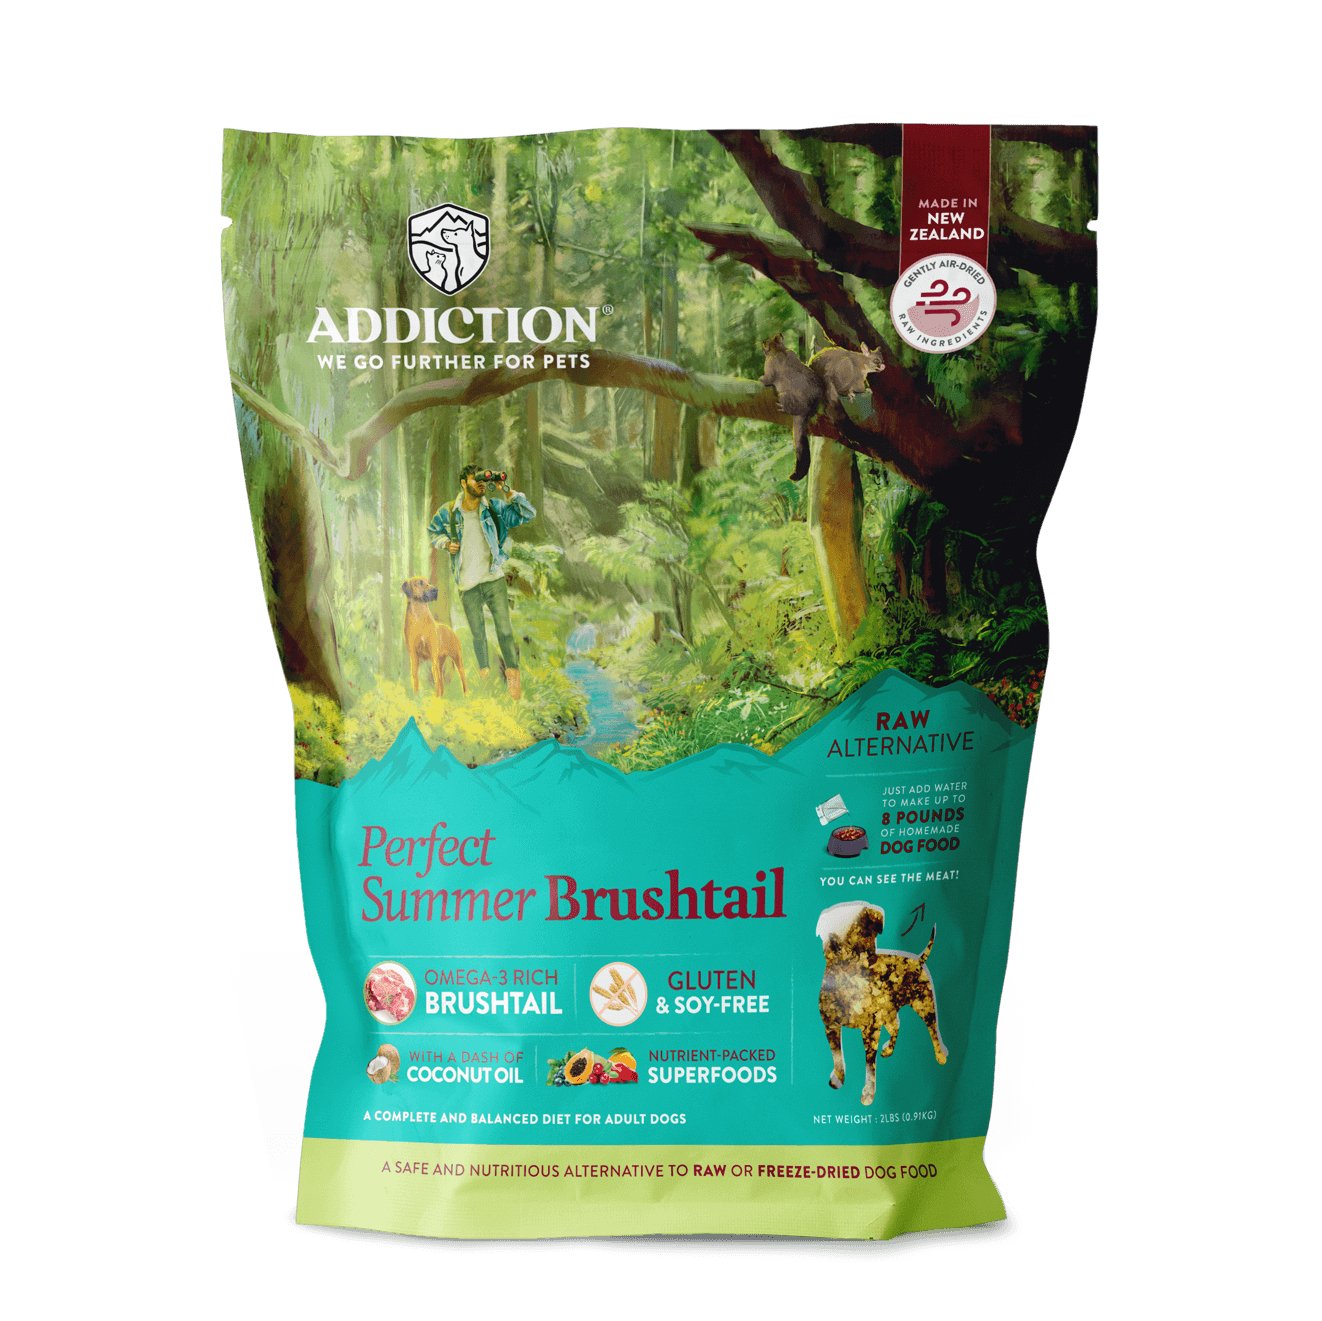 Addiction Perfect Summer Brushtail, Sensitive Care, Novel Protein Raw Alternative Dog Food - Tuck In Healthy Pet Food & Animal Natural Health Supplies